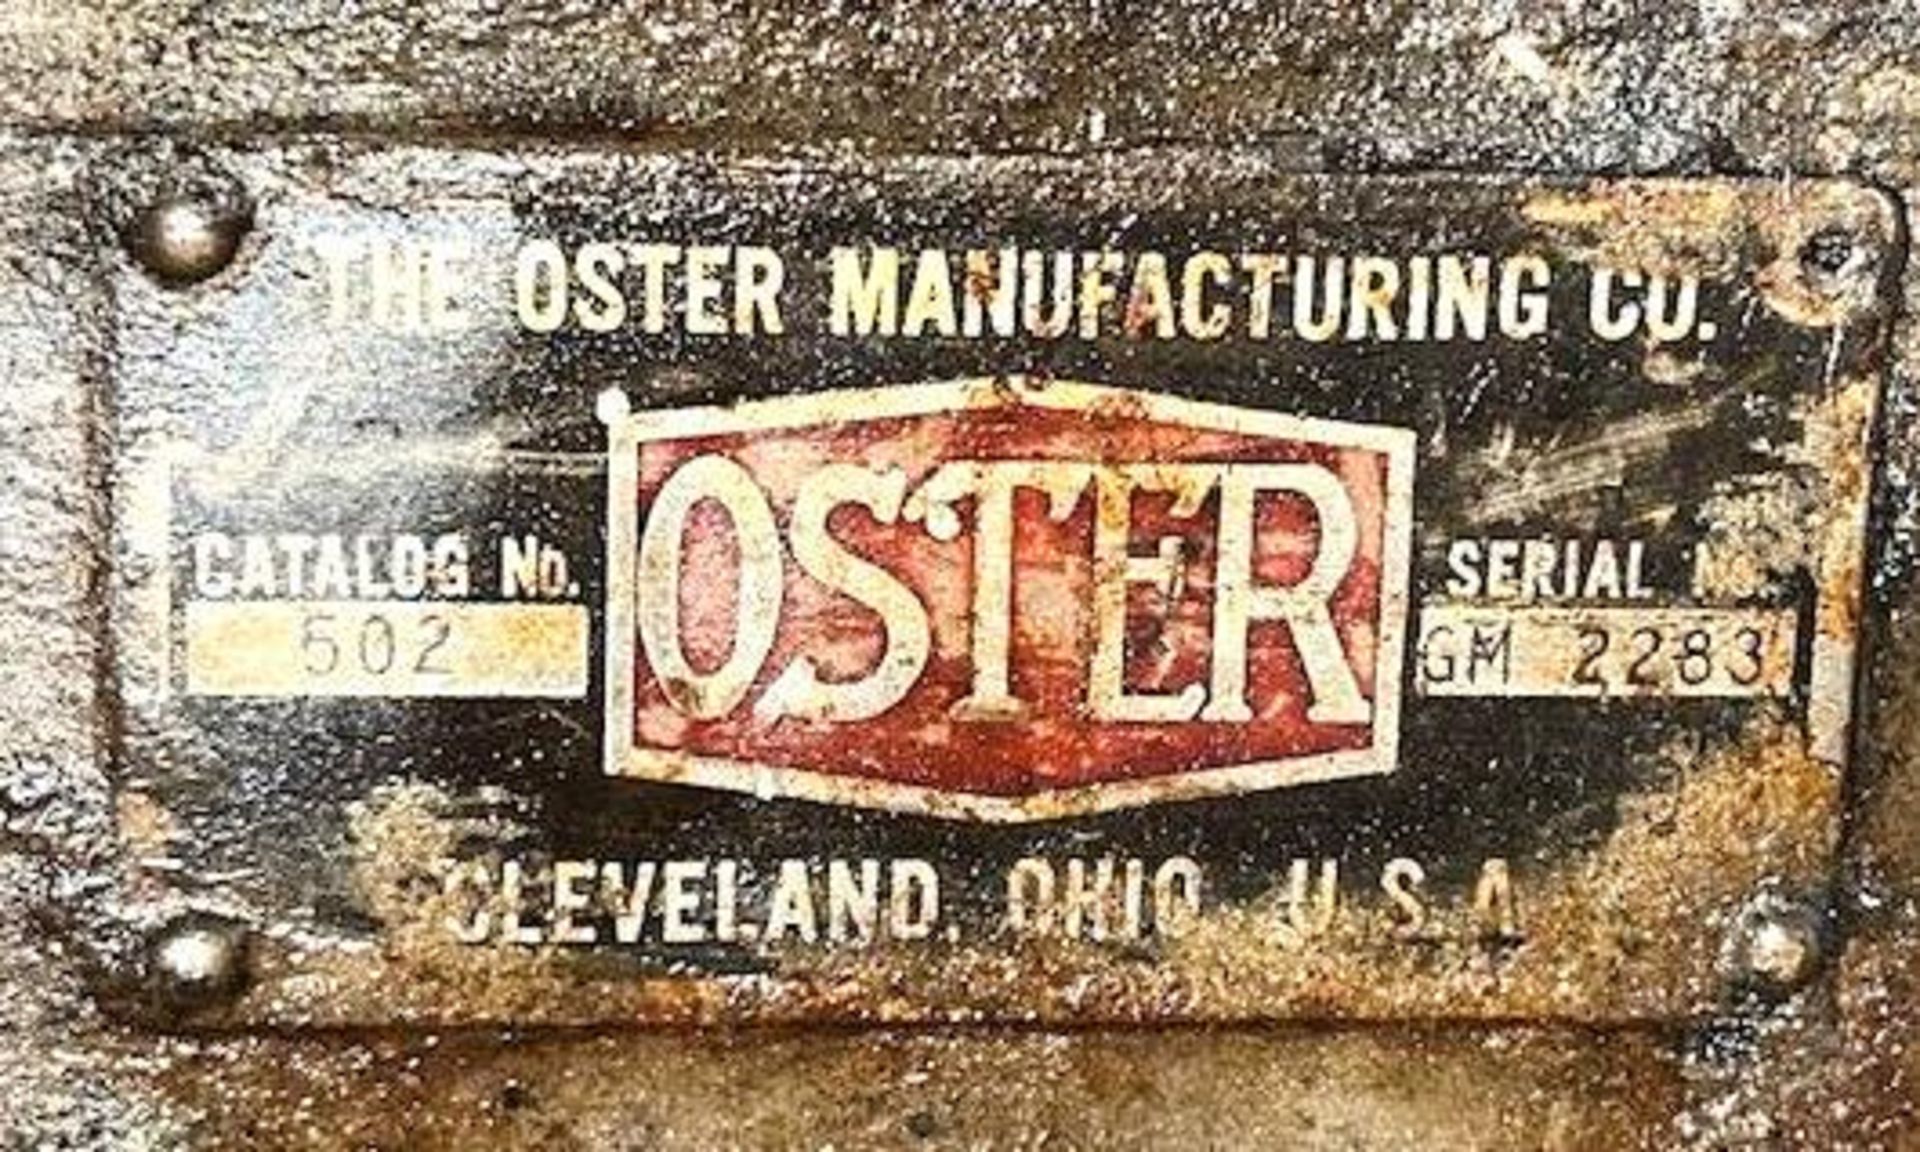 Oster Model 502 Portable Pipe Threading Machine - Image 6 of 7